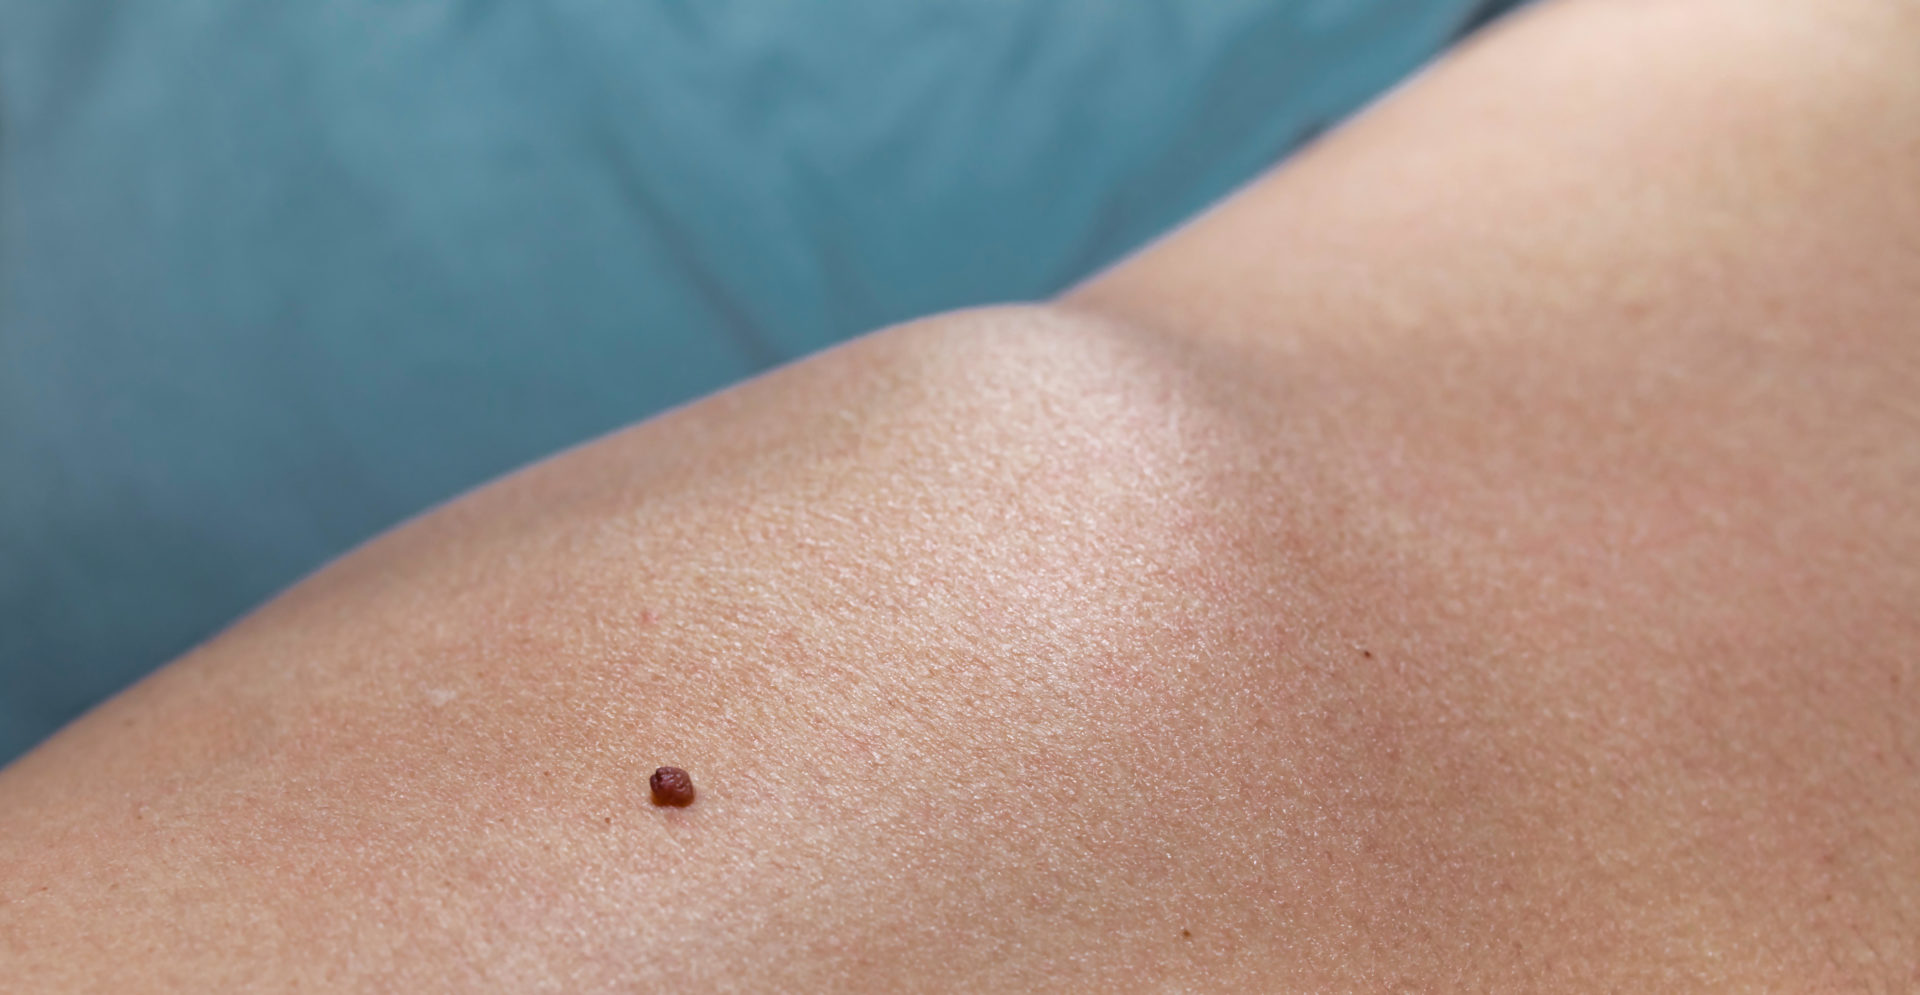 Close up shot of a brown raised skin mole, which can be a cause for melanoma. Image: Kurt Pacaud / Alamy Stock Photo